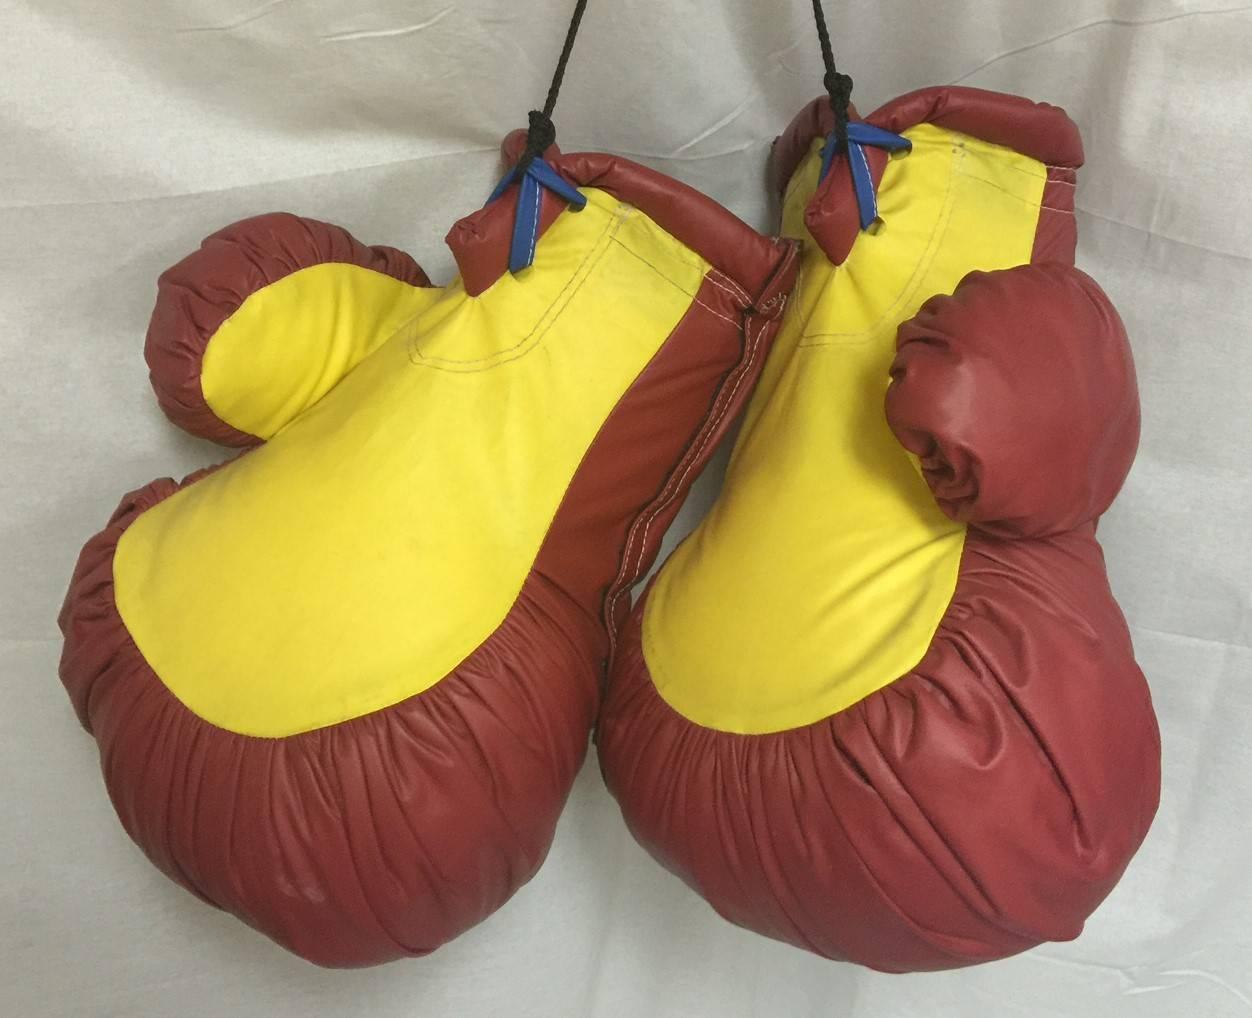 A very unique and eclectic pair of vintage over sized boxing gloves. Made of high quality red and yellow two-tone vinyl. Possibly used as a promotional item, they can be worn on each fist via a bar inside each glove.